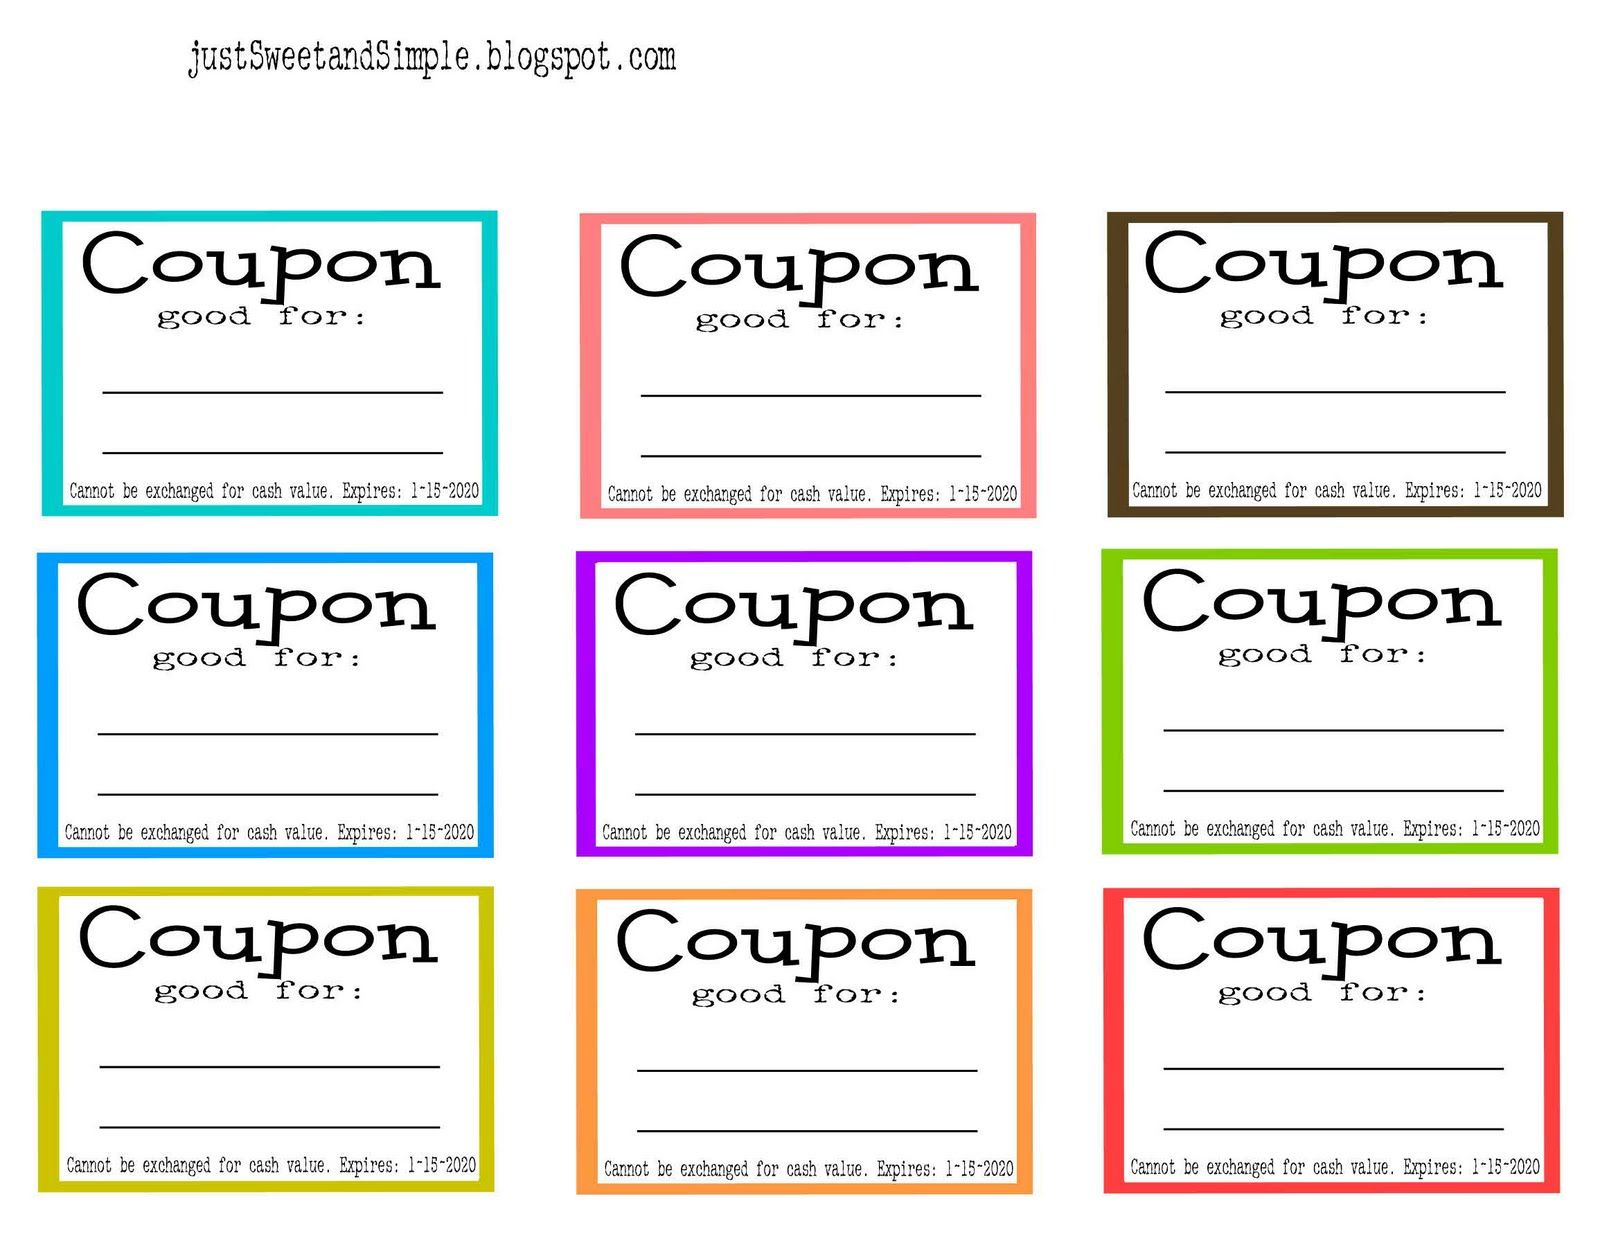 Chores+And+Cleaning+Ideas+For+Kids | Just Sweet And Simple: Mother&amp;#039;s - Free Printable Coupons For Husband